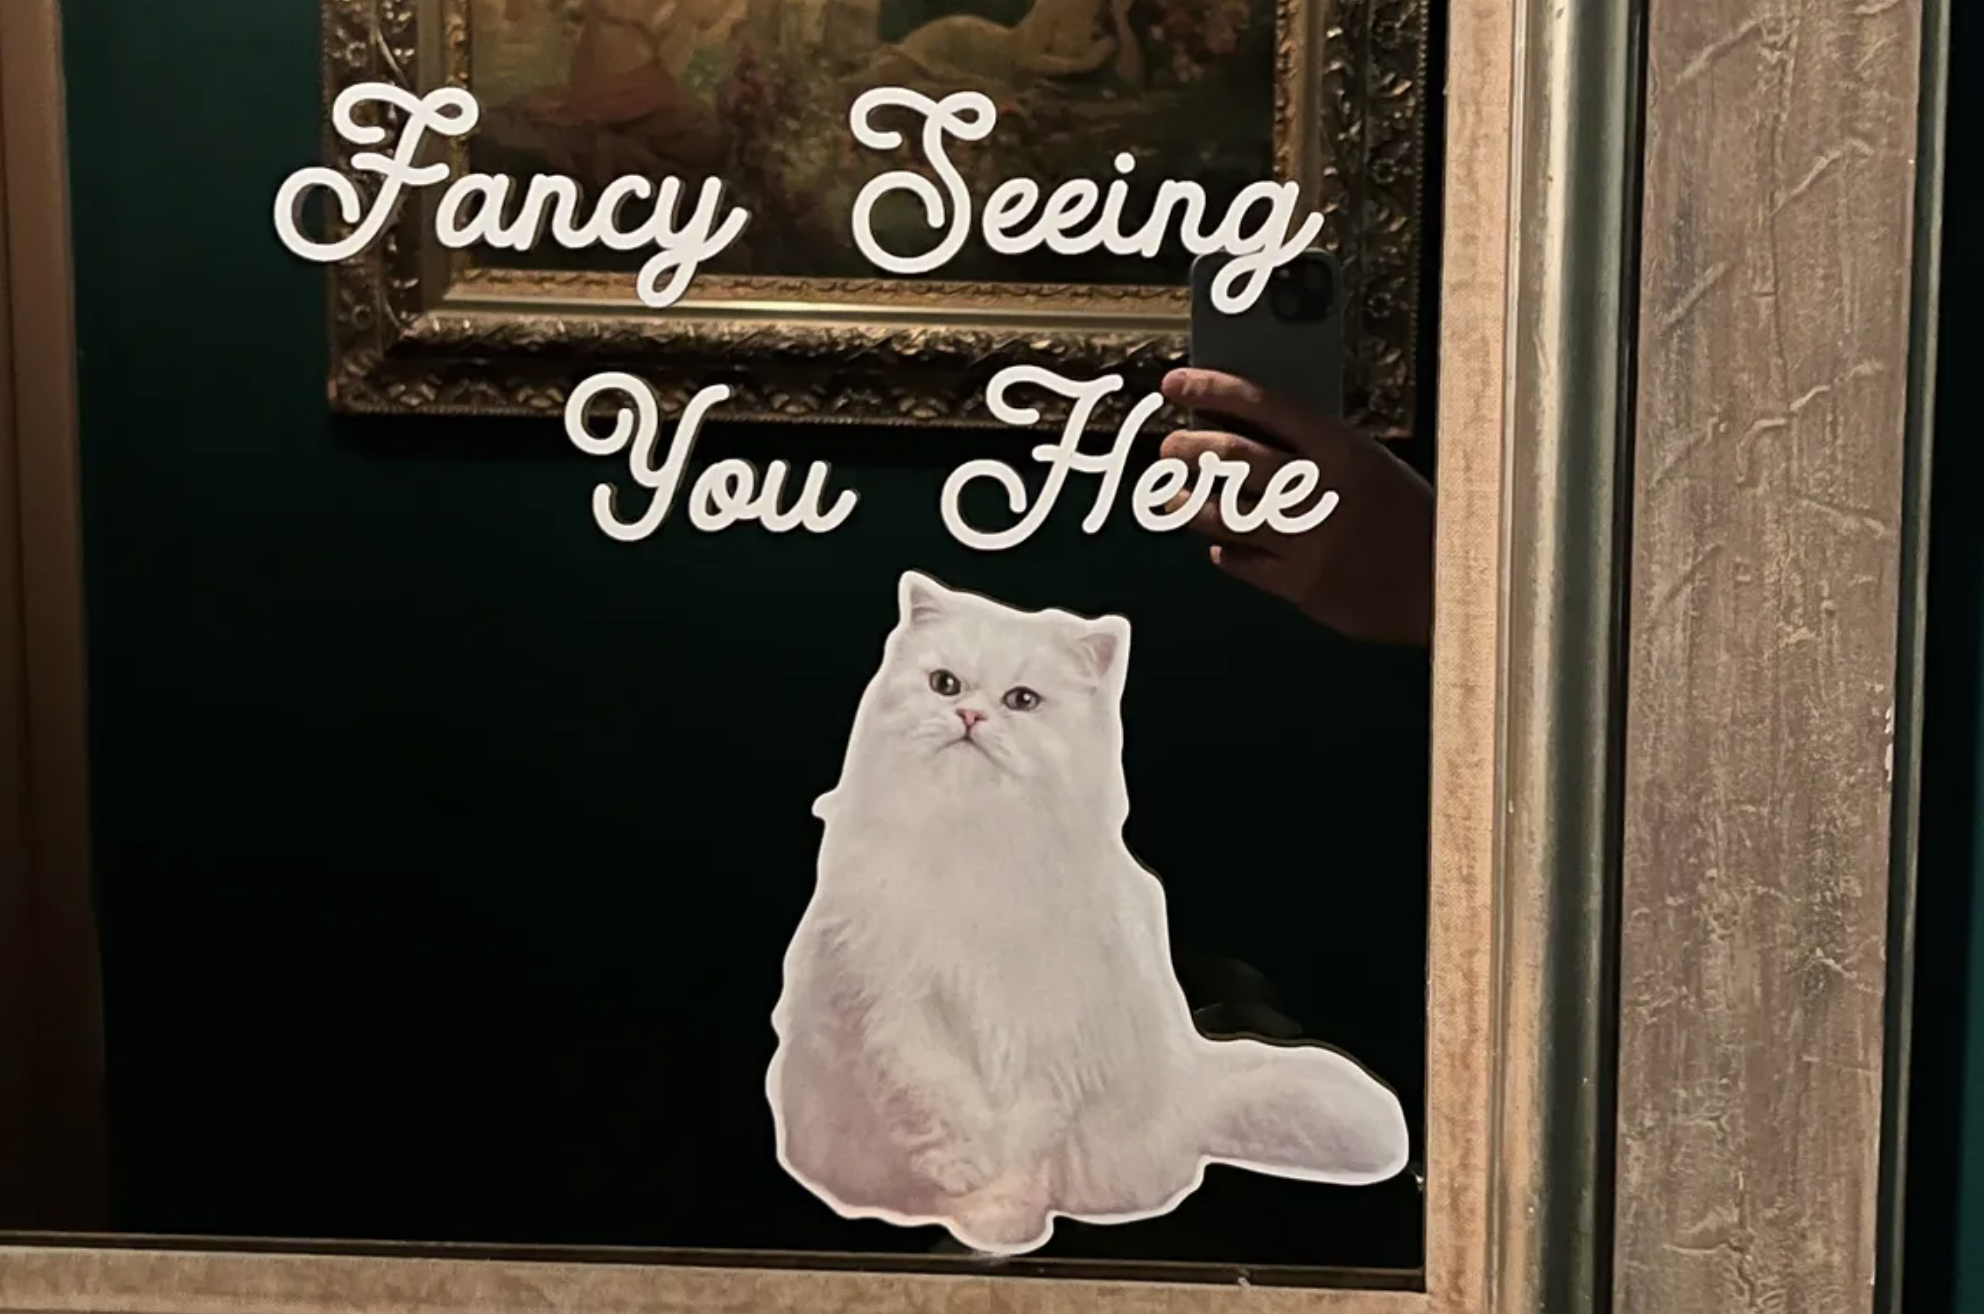 Mirror reading “Fancy Seeing You Here” in script; underneath an image of a white cat looks upward.